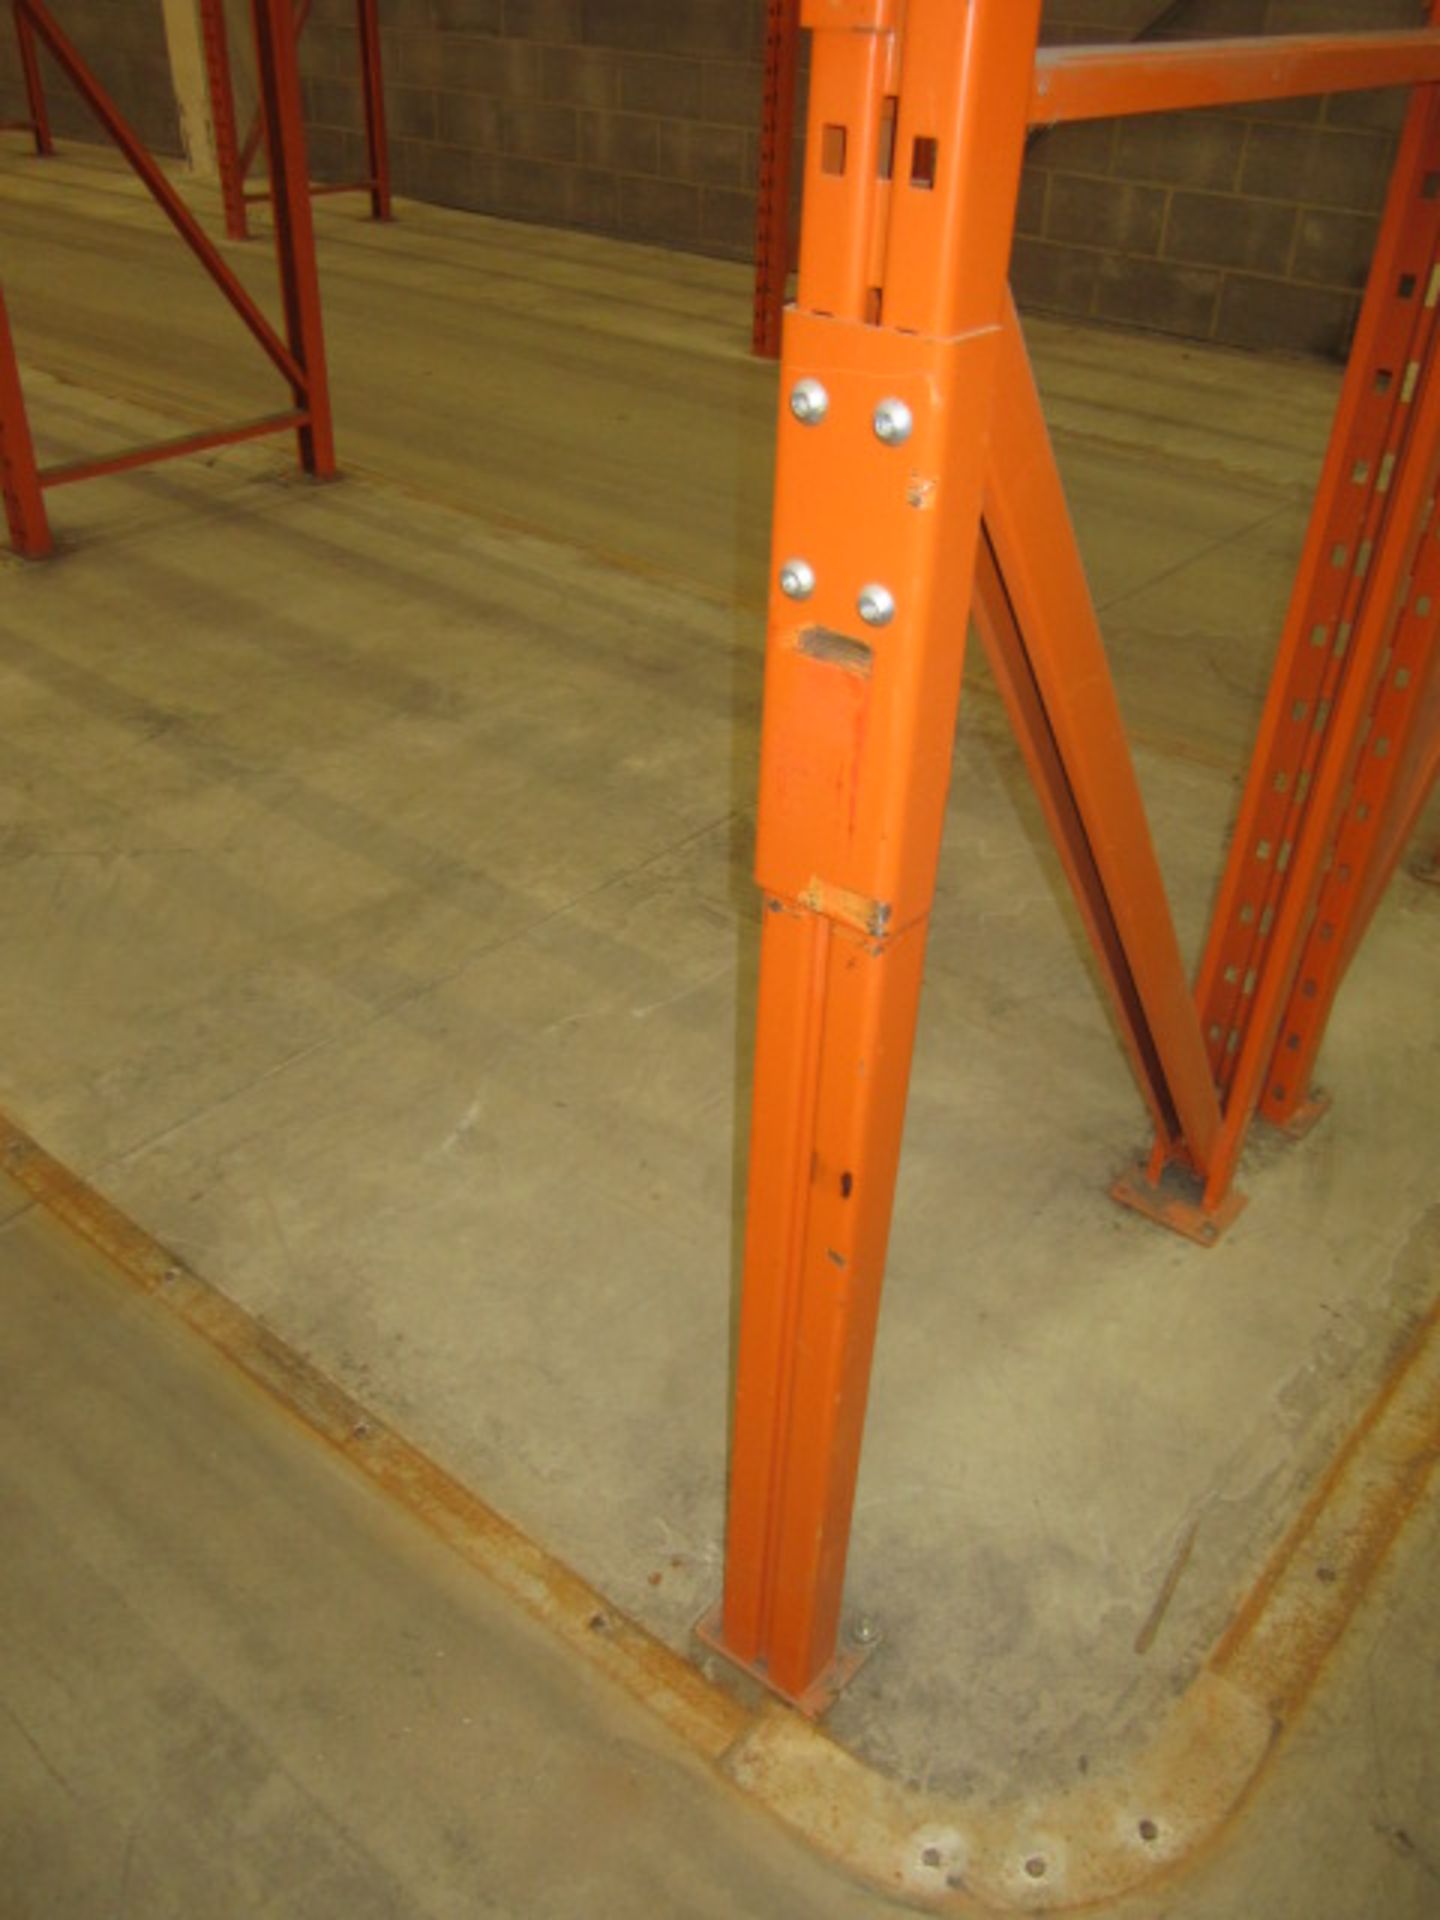 11 bays of Redirack boltless pallet racking, approx. sizes depth 800mm x width 2,750mm x Height 7m - - Image 2 of 2